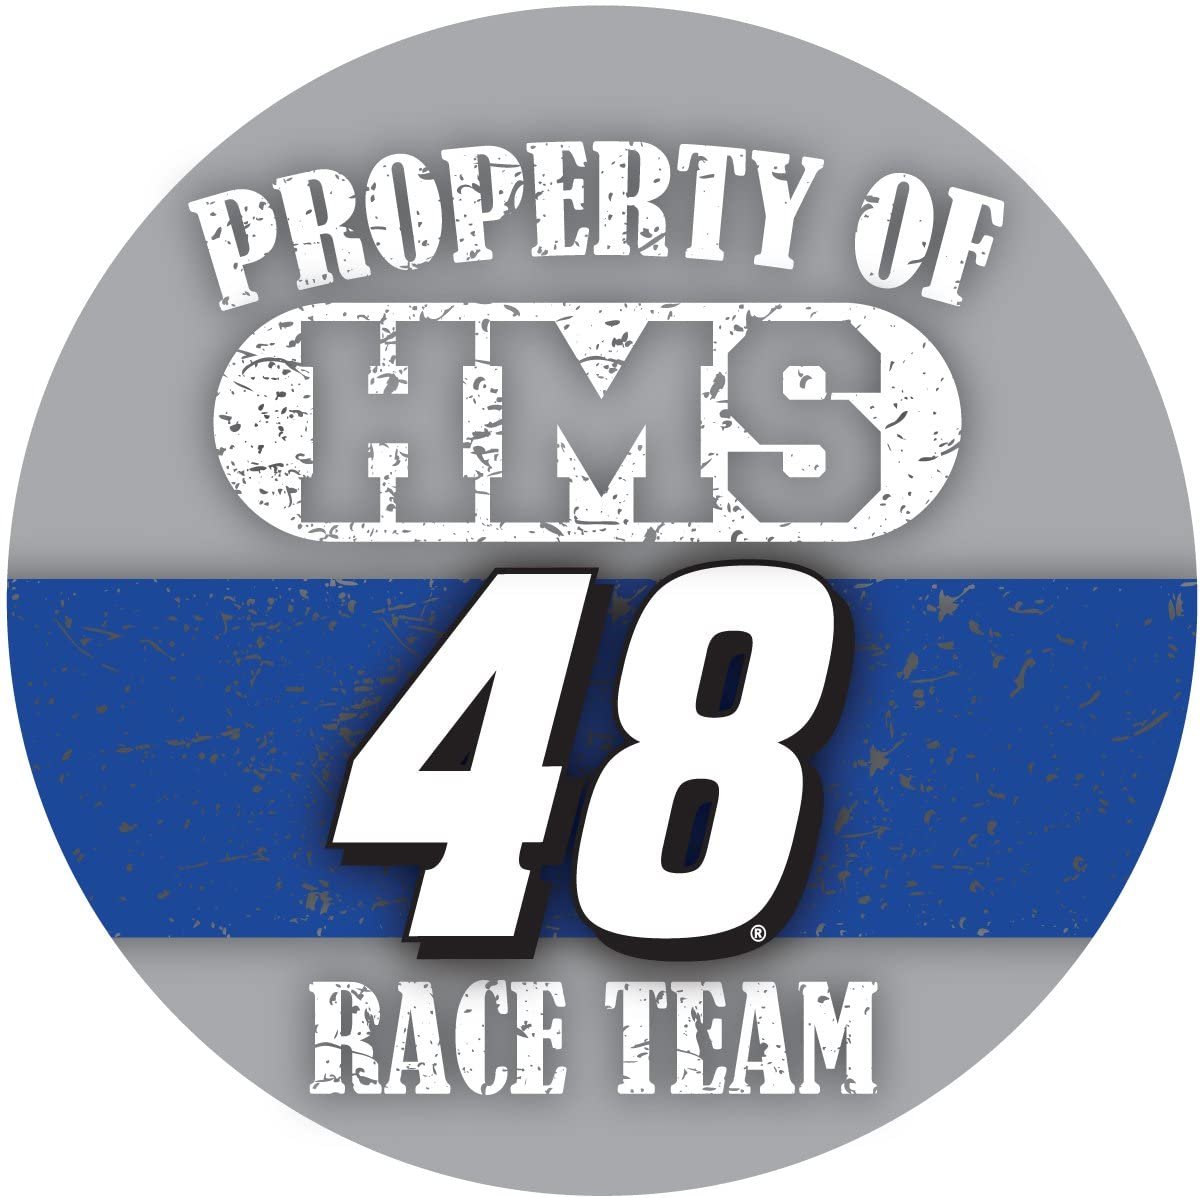 NASCAR #48 Jimmie Johnson 4" Round "Property Of" Race Team Magnet-New for 2016!